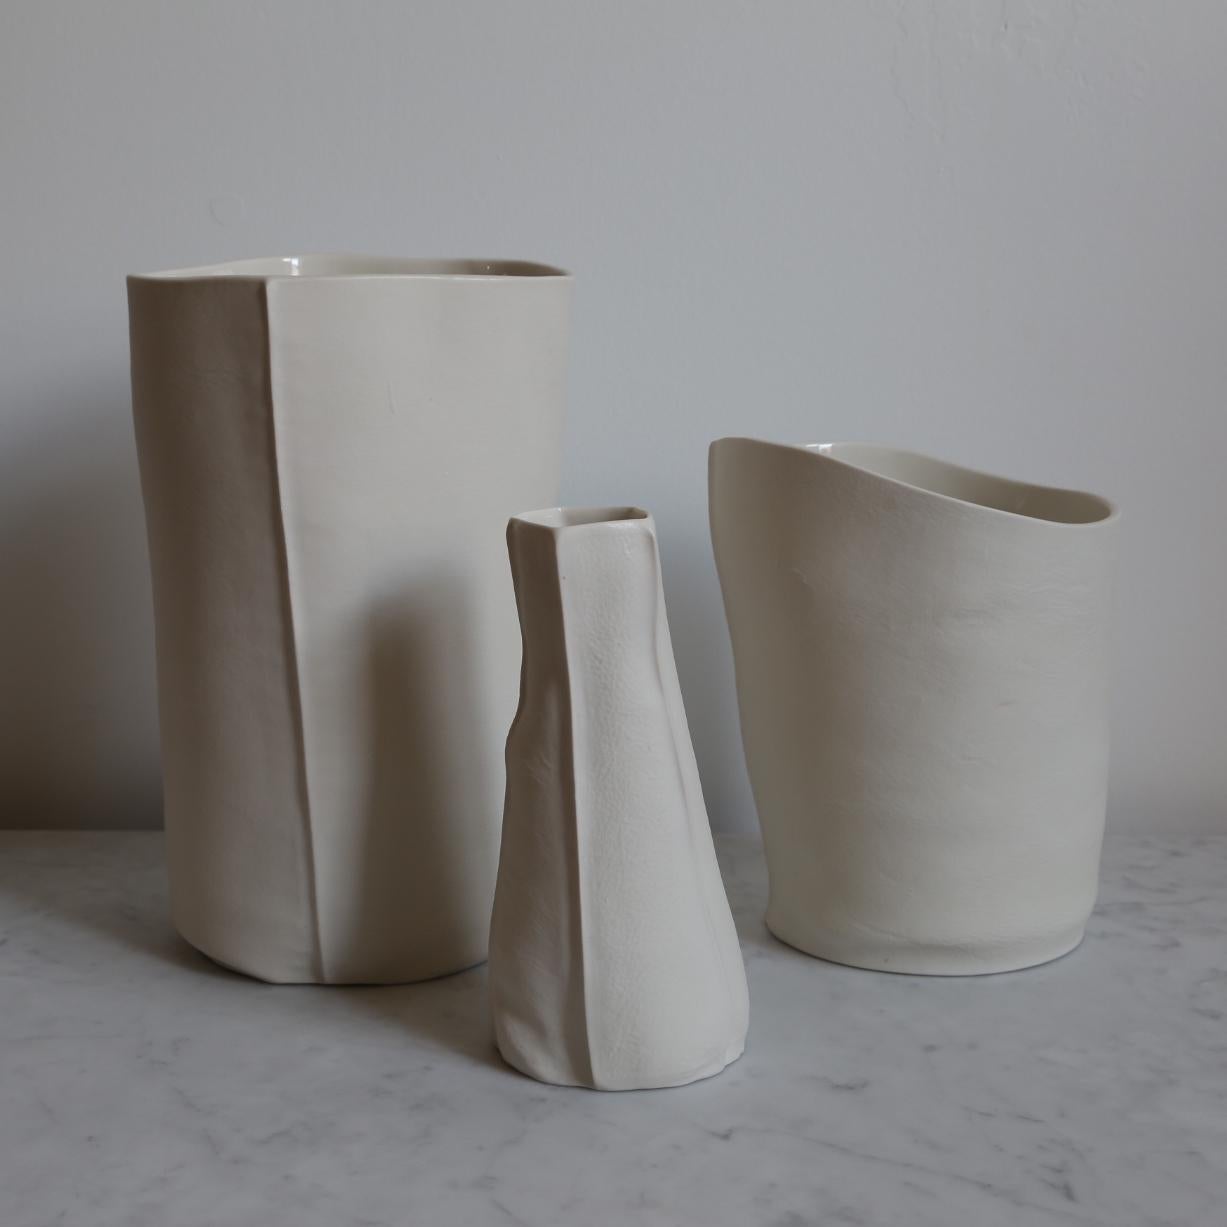 Set of Three Unique Kawa Vases and Vessels, Porcelain, Ceramic, in Stock 3